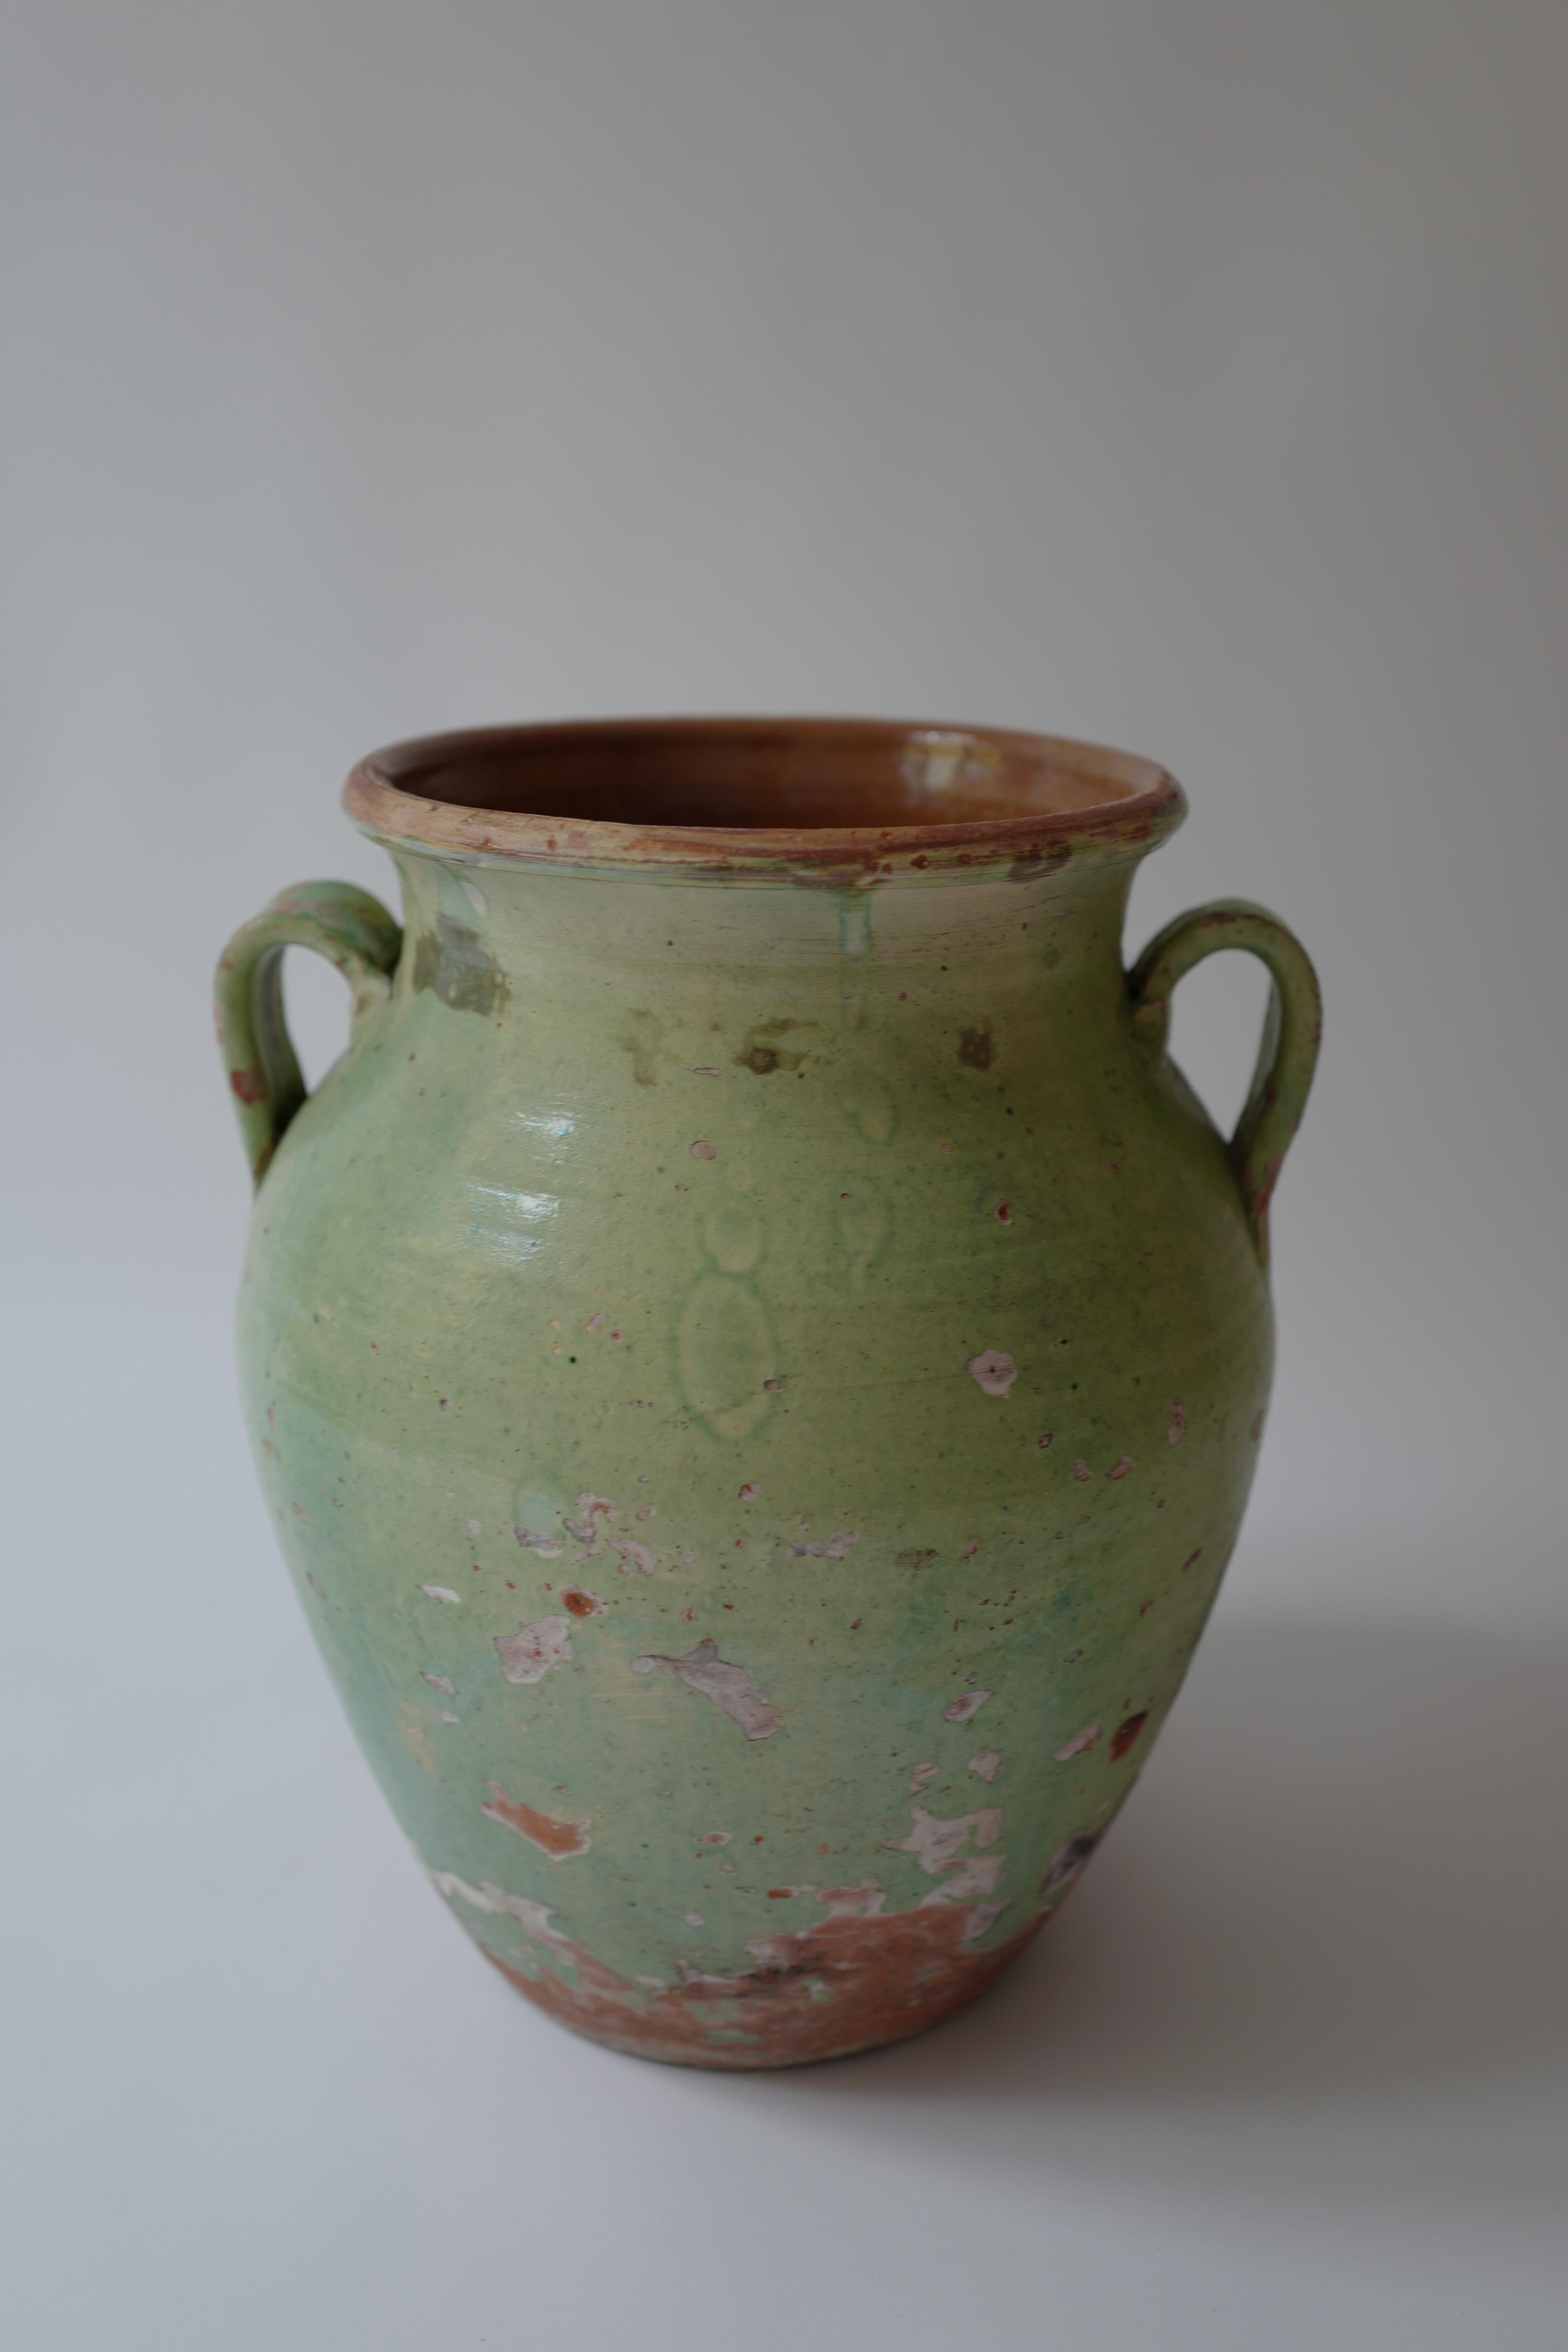 Rare pale green glazed terracotta pot from France. Really beautiful time worn patina. Interior has a light brown glaze.